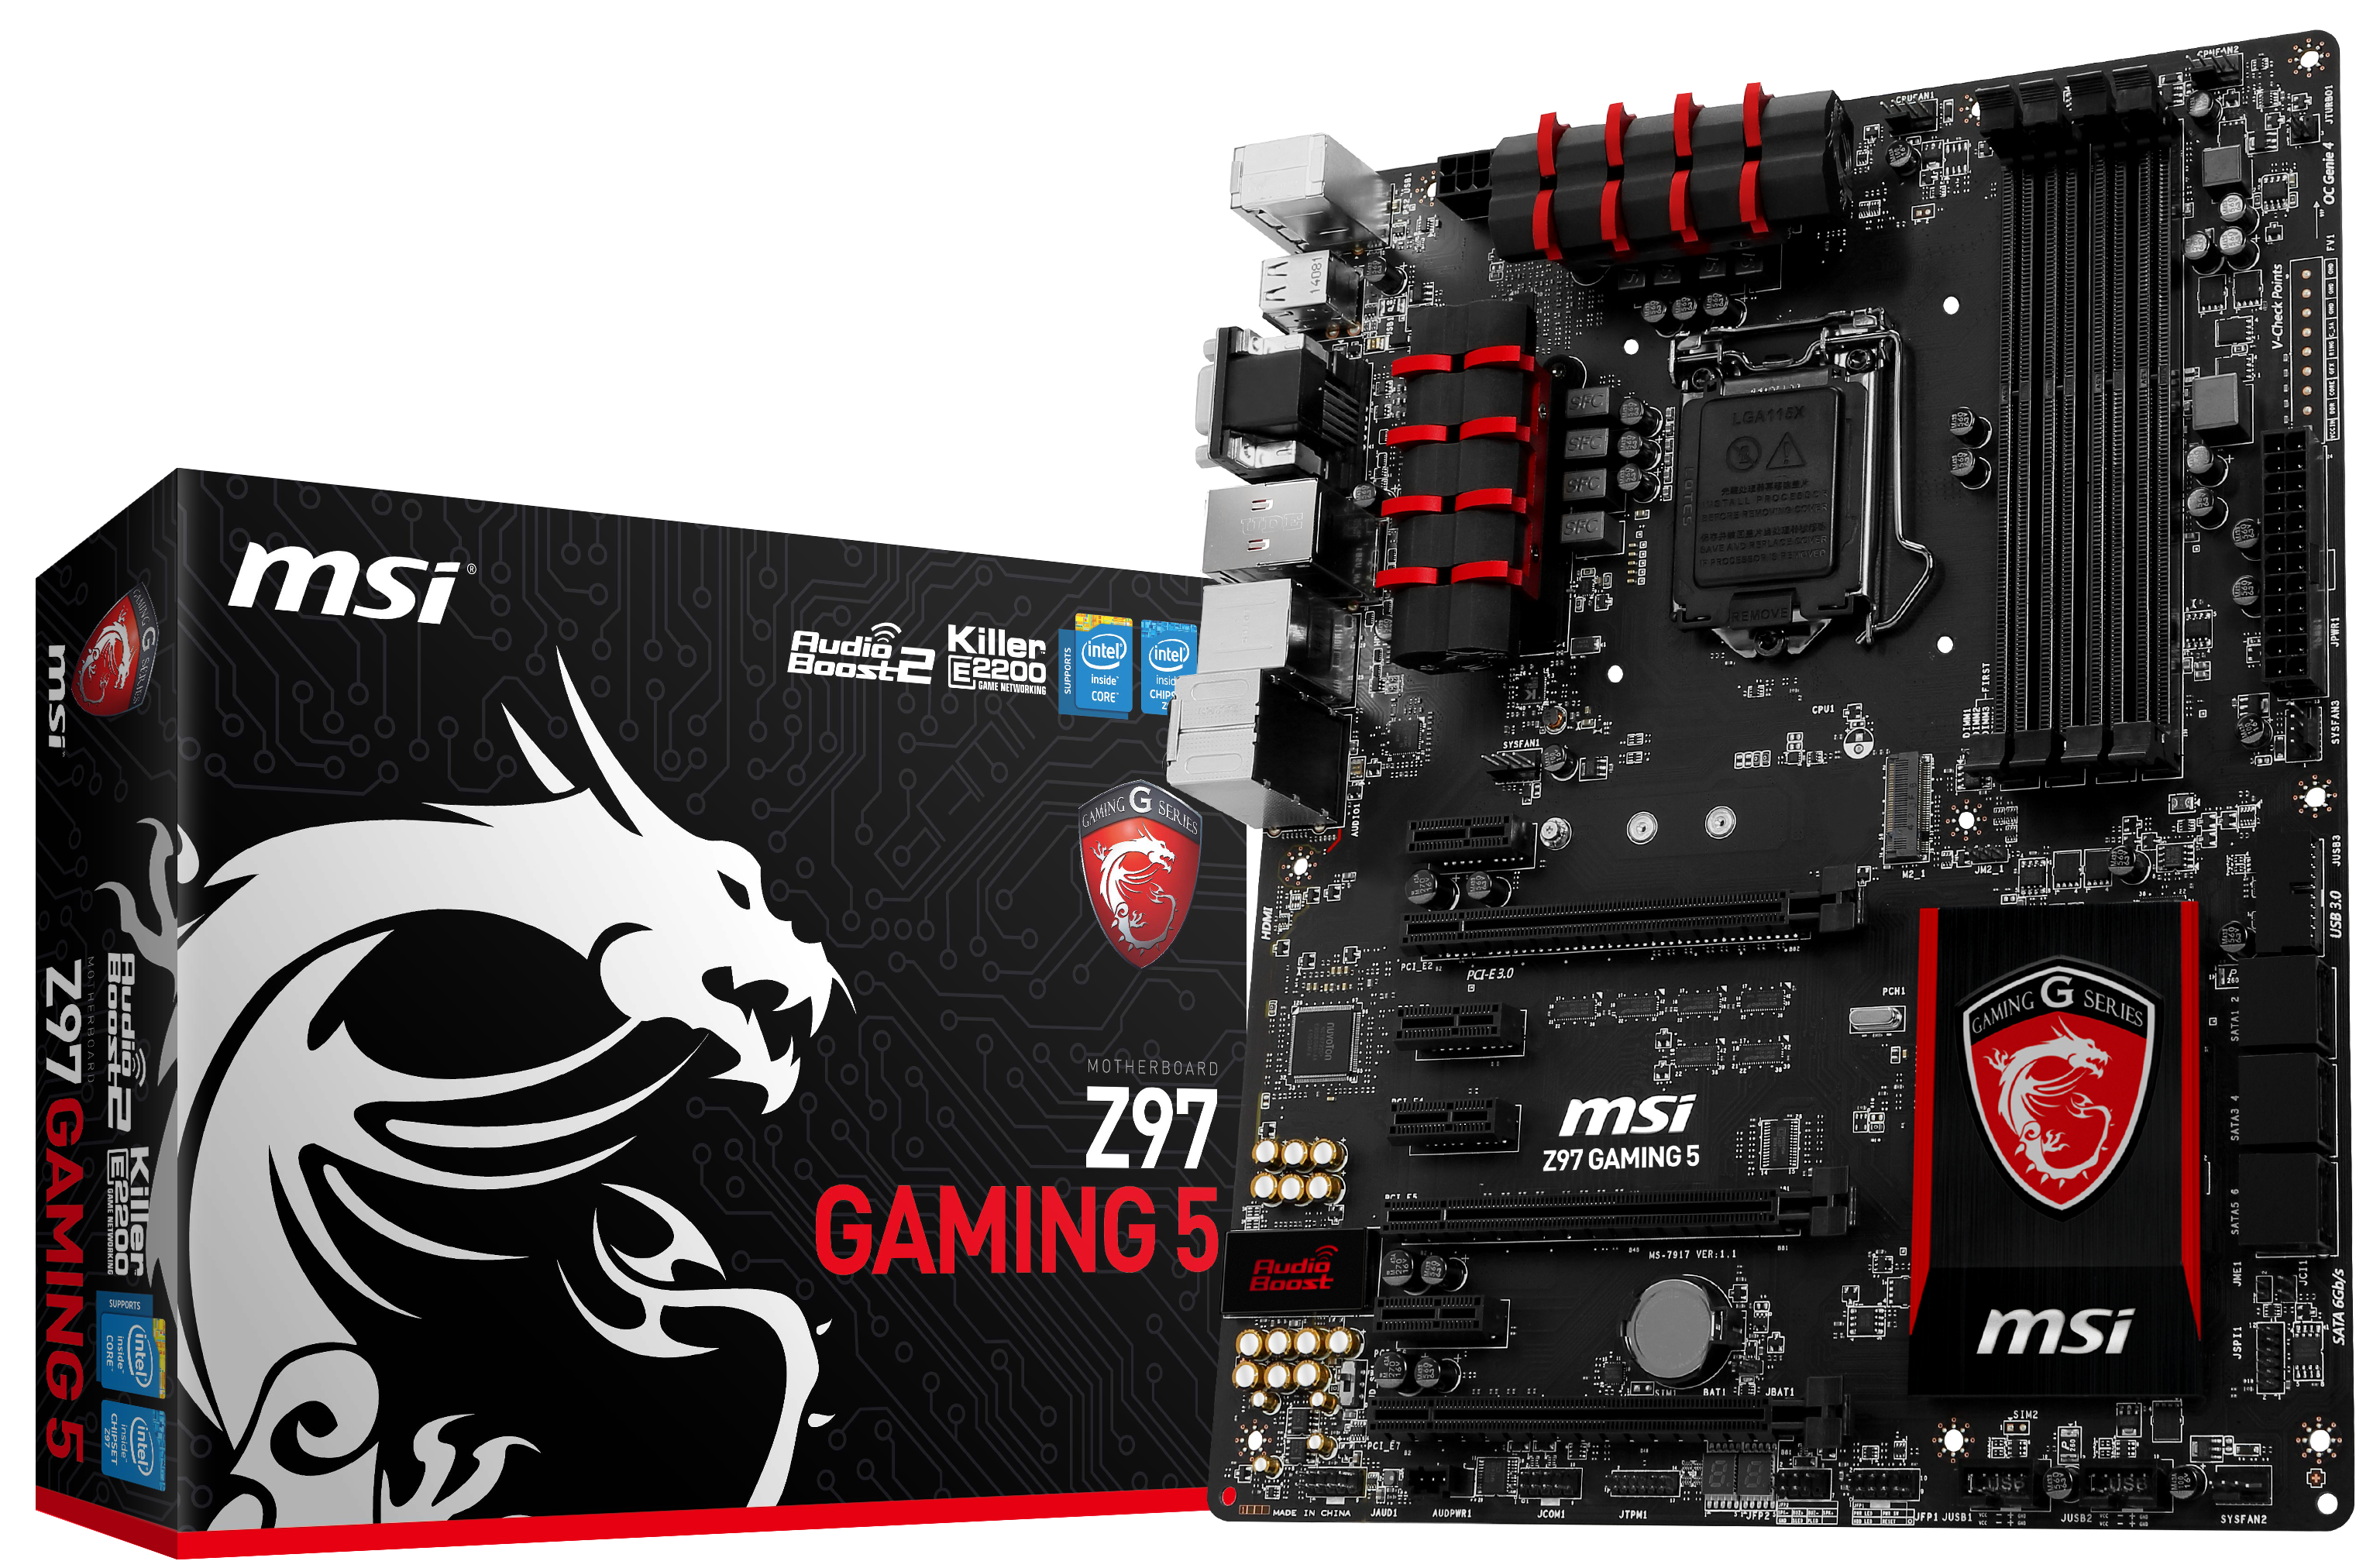 MSI Z97 Gaming 5 Conclusion - MSI Z97 Gaming 5 Motherboard Review: Five